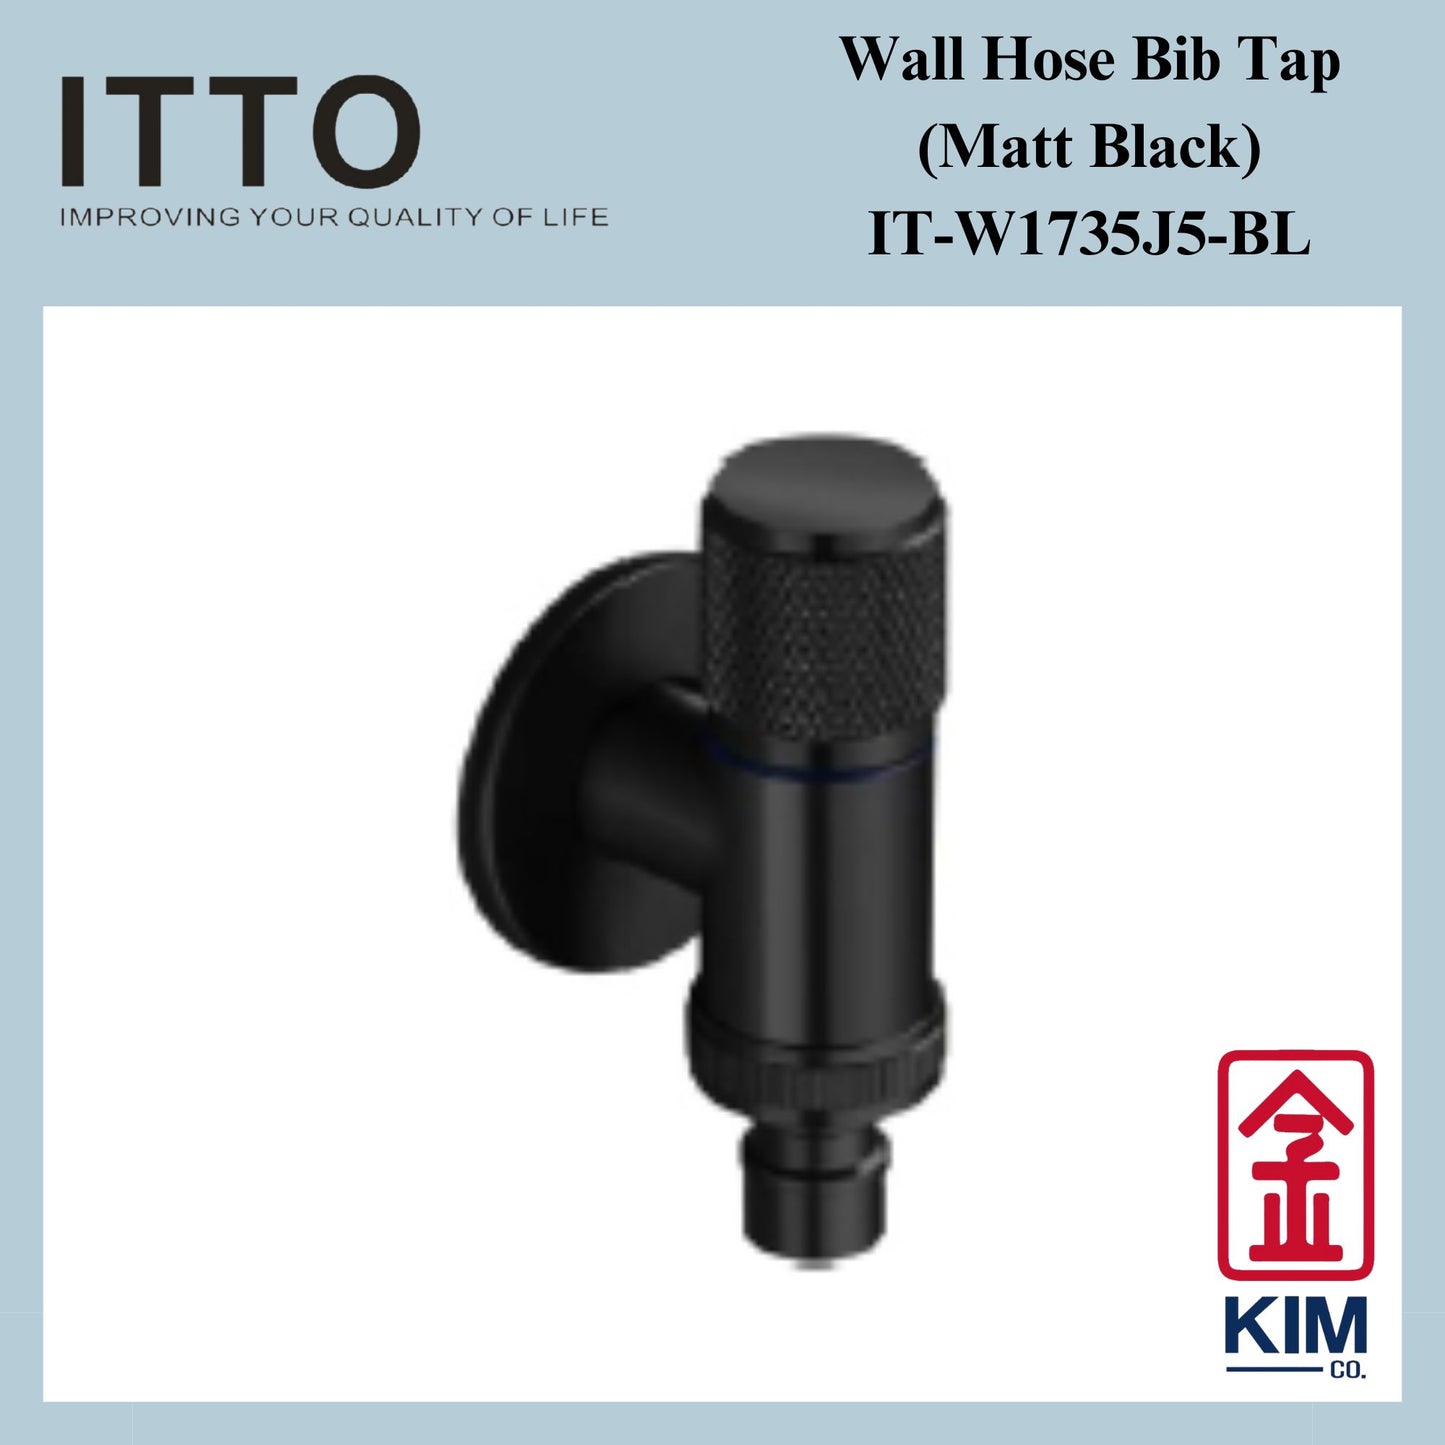 Itto Stainless Steel 304 Wall Hose Bib Tap